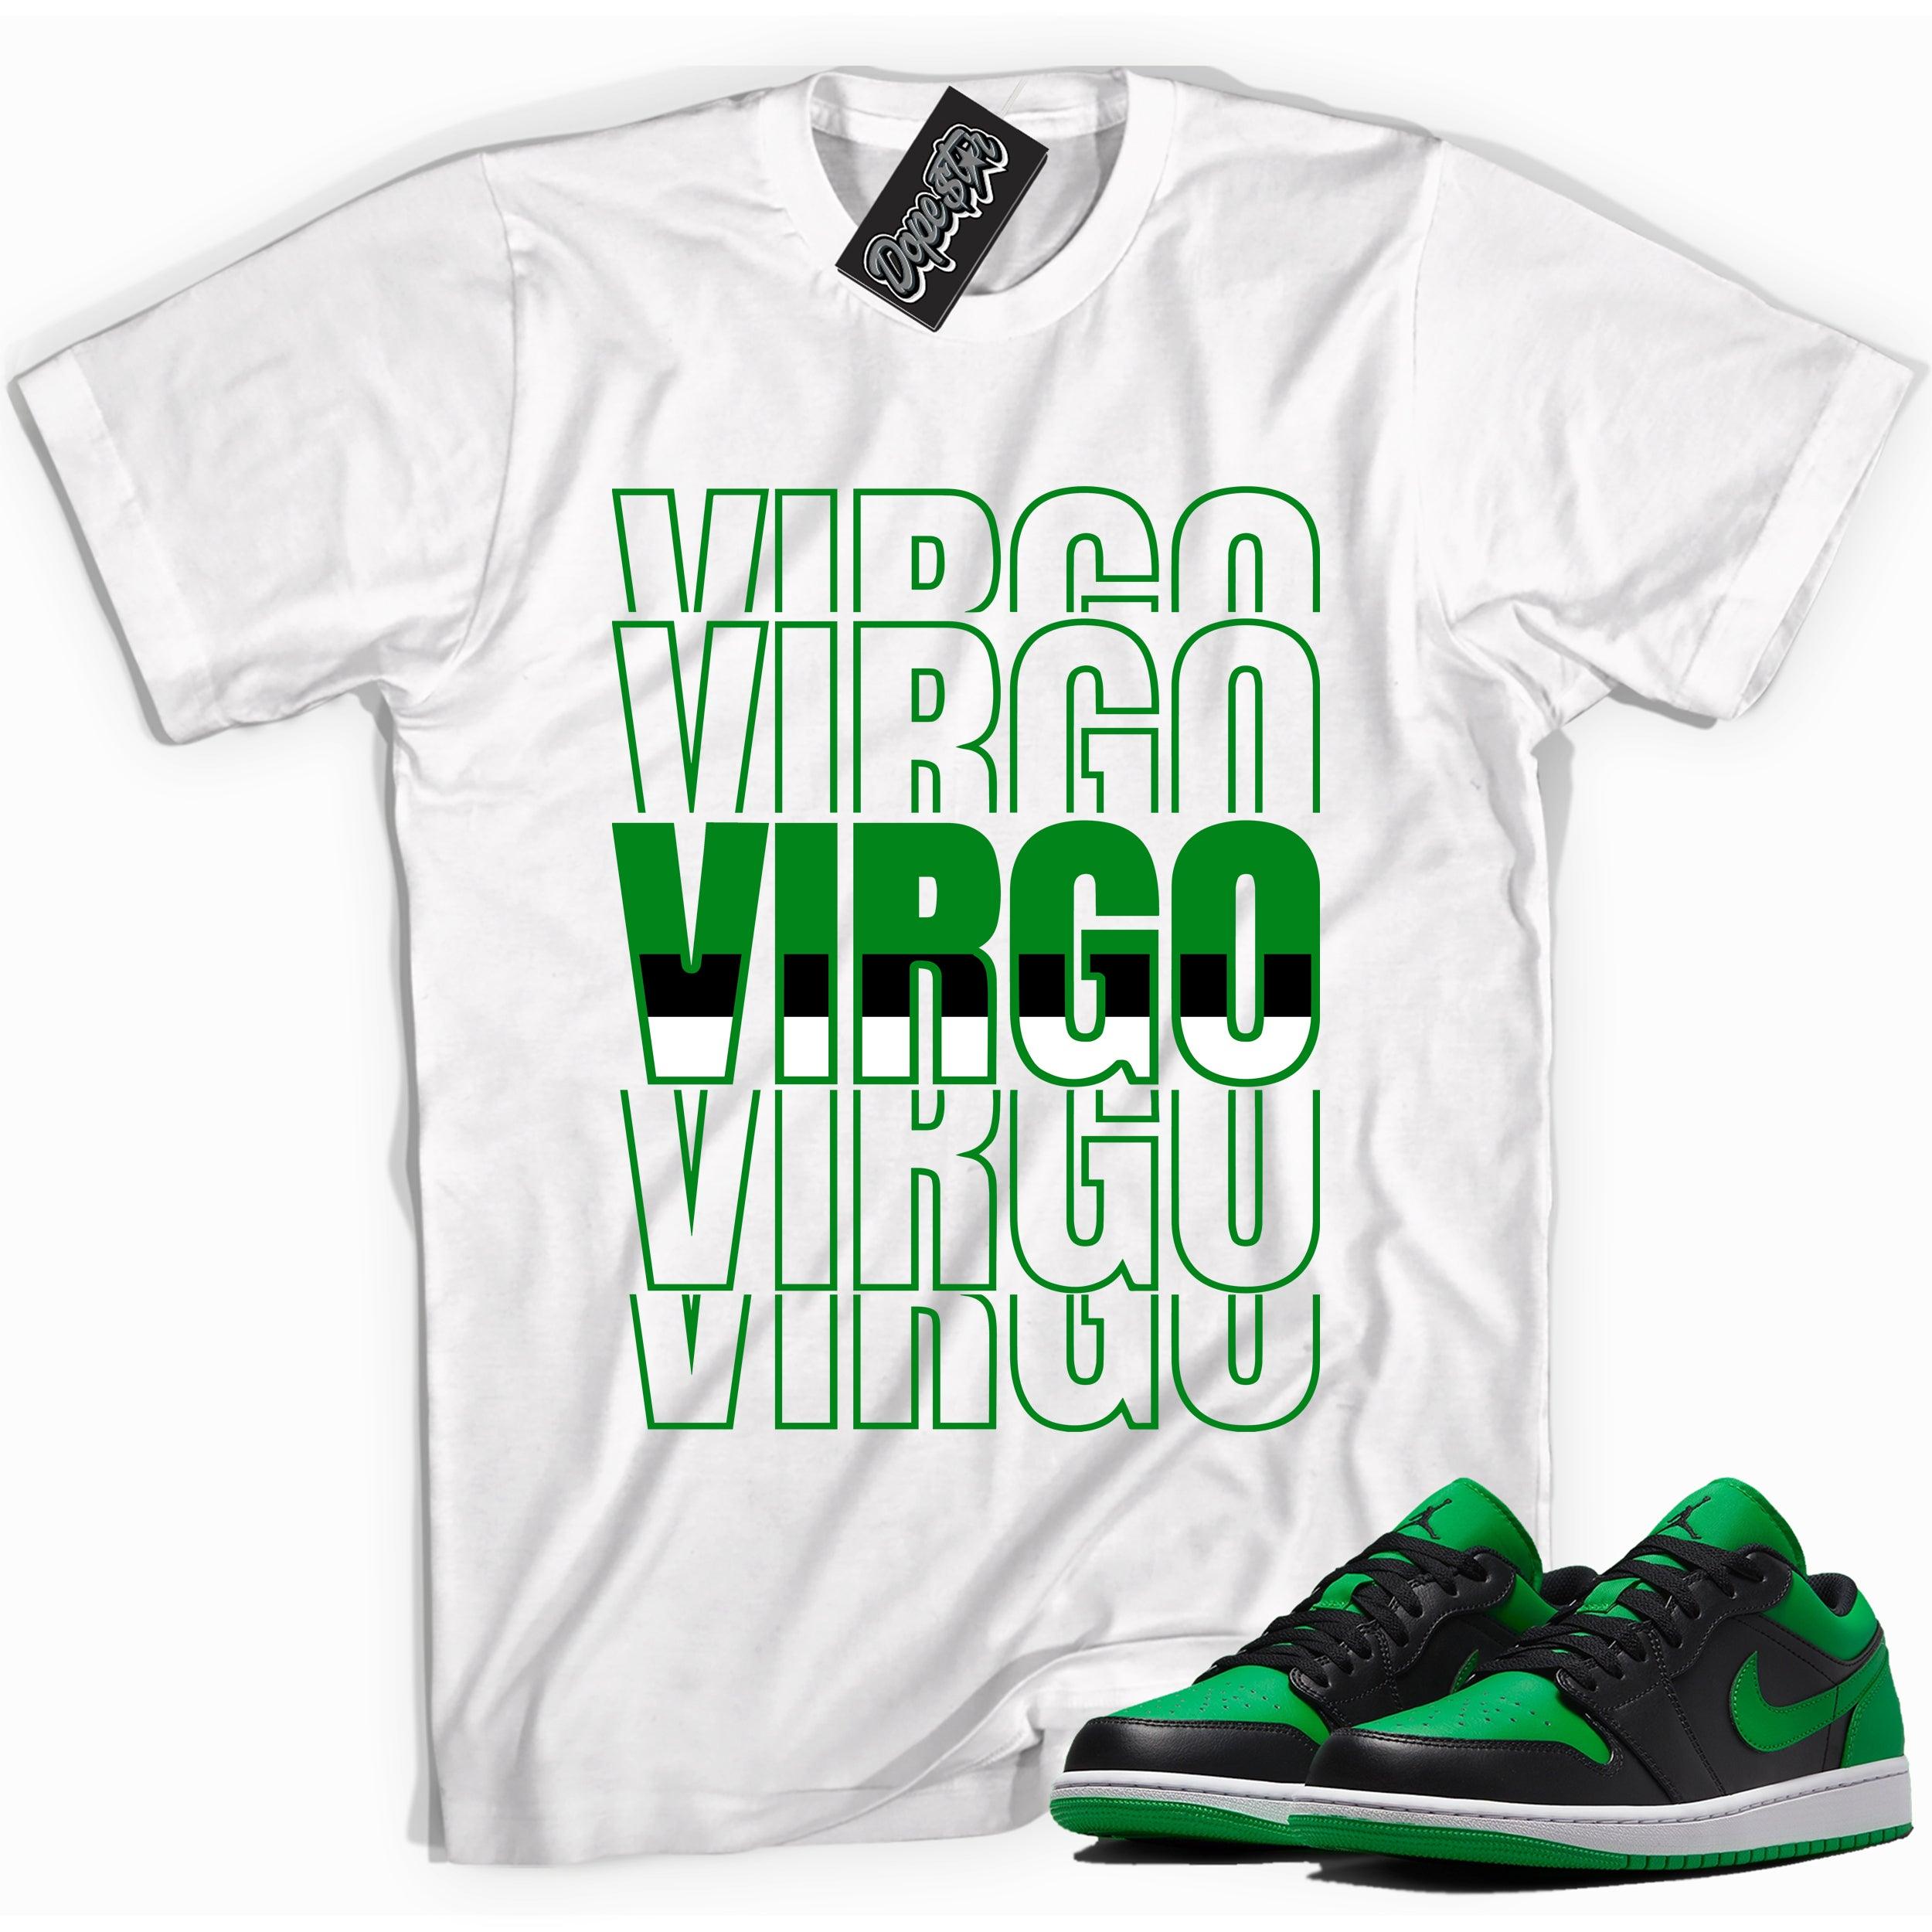 Cool white graphic tee with 'virgo' print, that perfectly matches Air Jordan 1 Low Lucky Green sneakers